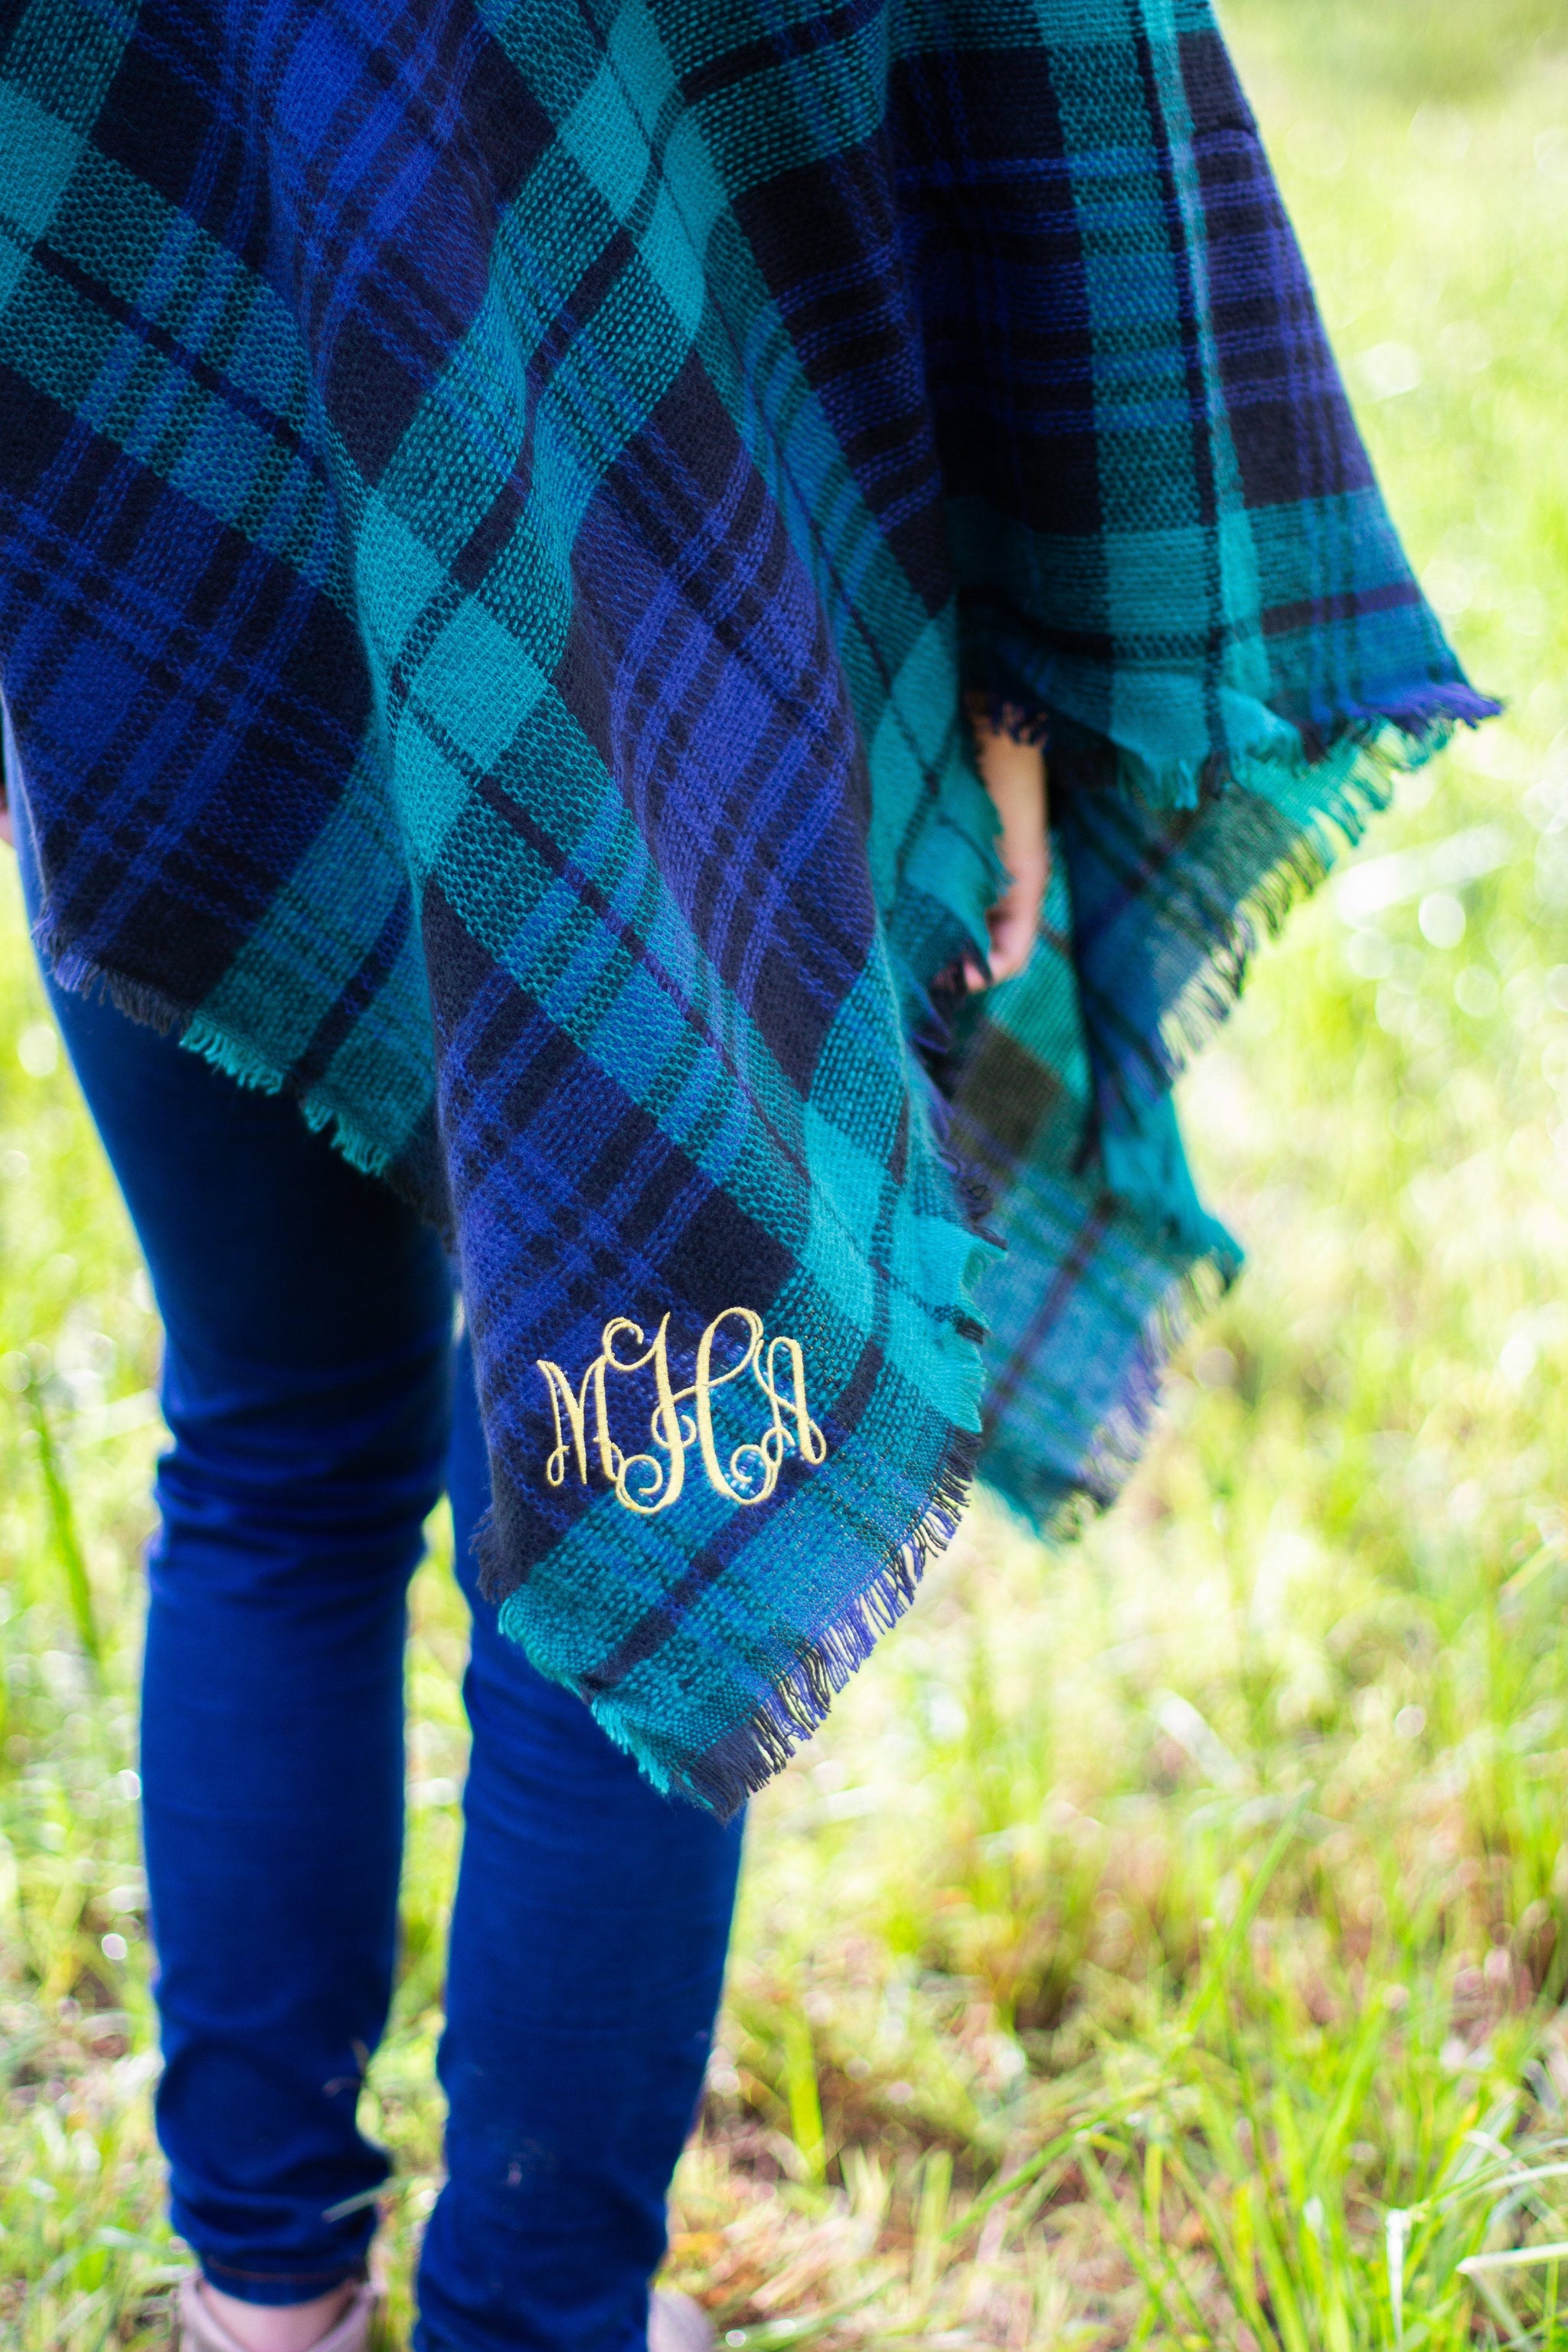 Personalized Blanket Scarf, Monogrammed Blanket Scarf, Gray Plaid